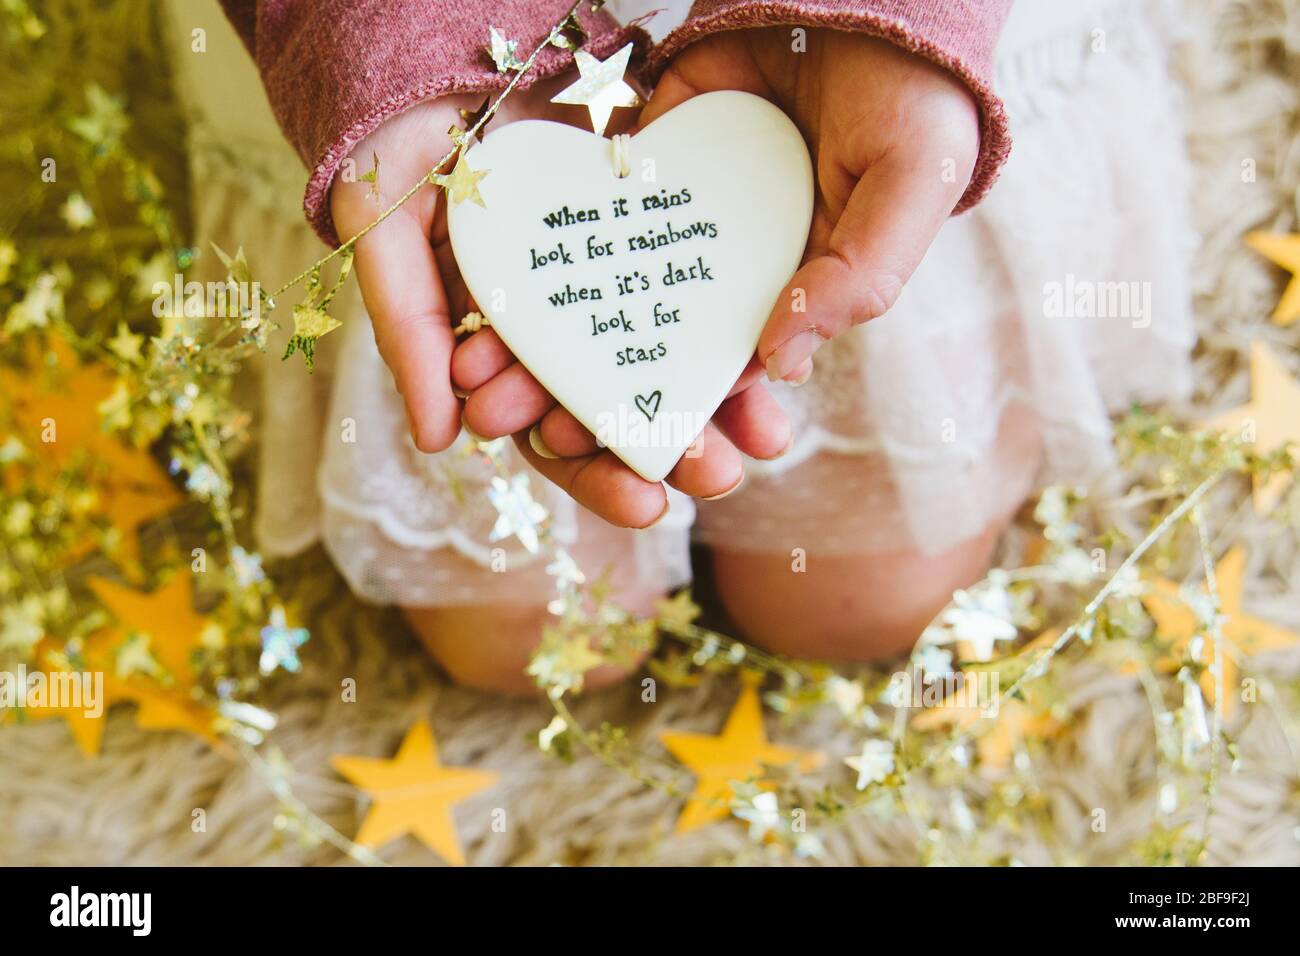 A girl or woman holding a heart with the quote when it rains look for rainbows, surrounded by gold stars. Coronavirus lockdown positive uplifting Stock Photo